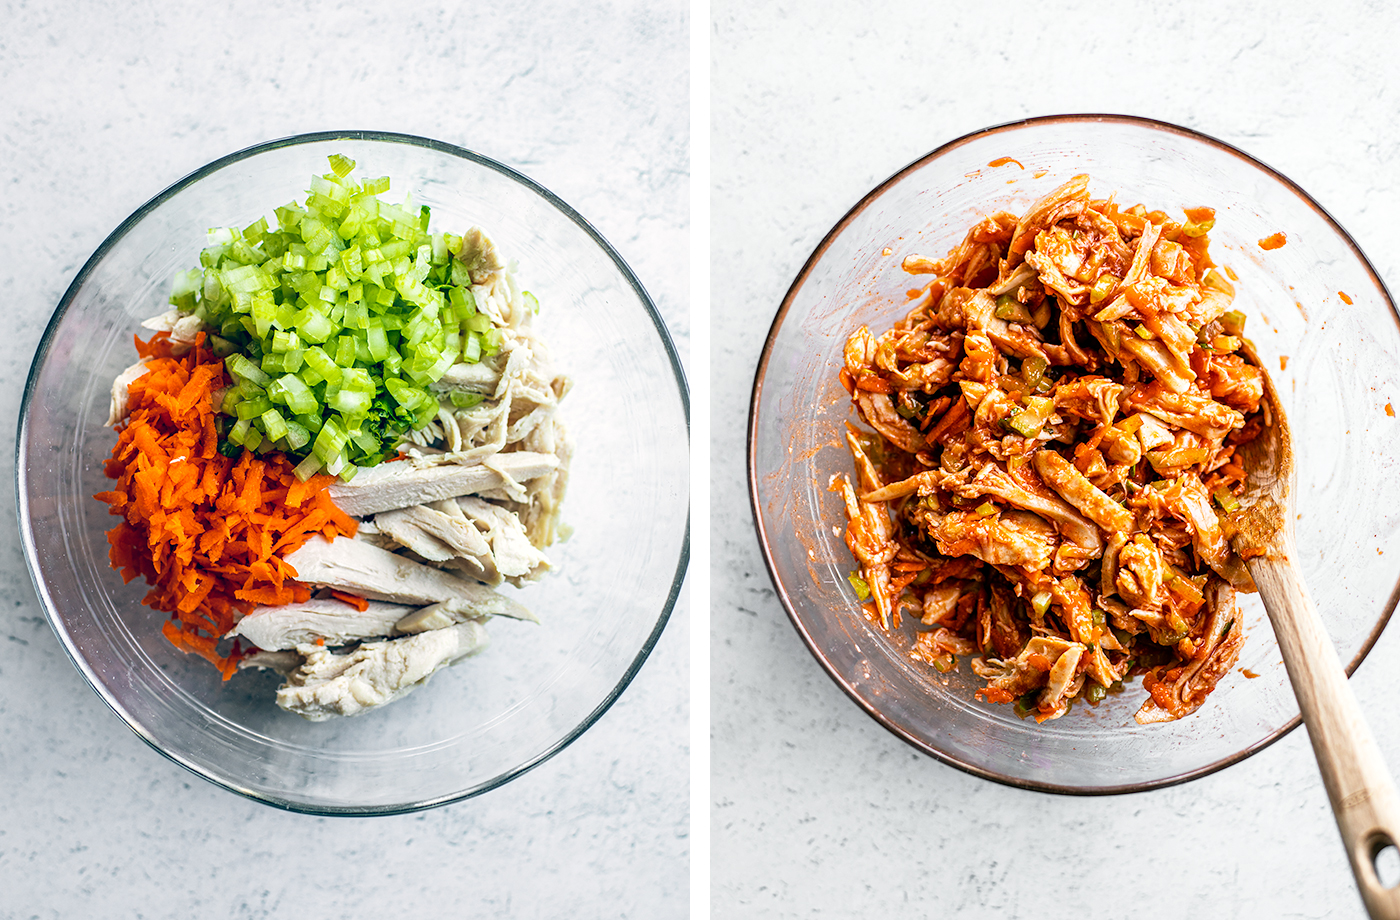 Left: Mixing bowl with chicken, carrots, and celery; Right: Mixing bowl with chicken, carrots, and celery mixed up in hot sauce.